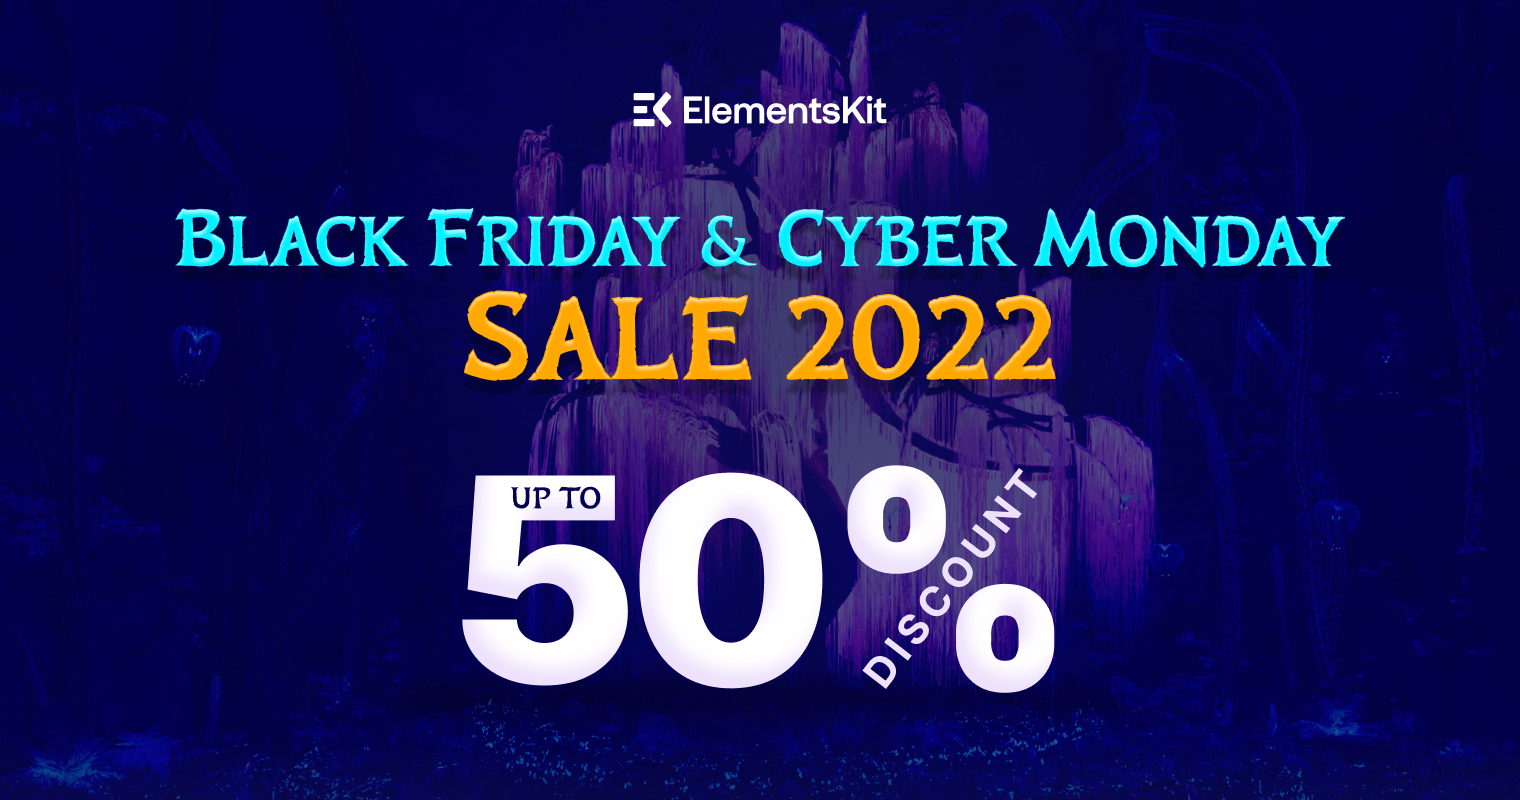 Elementskit Black Friday and Cyber Monday Deal 2022